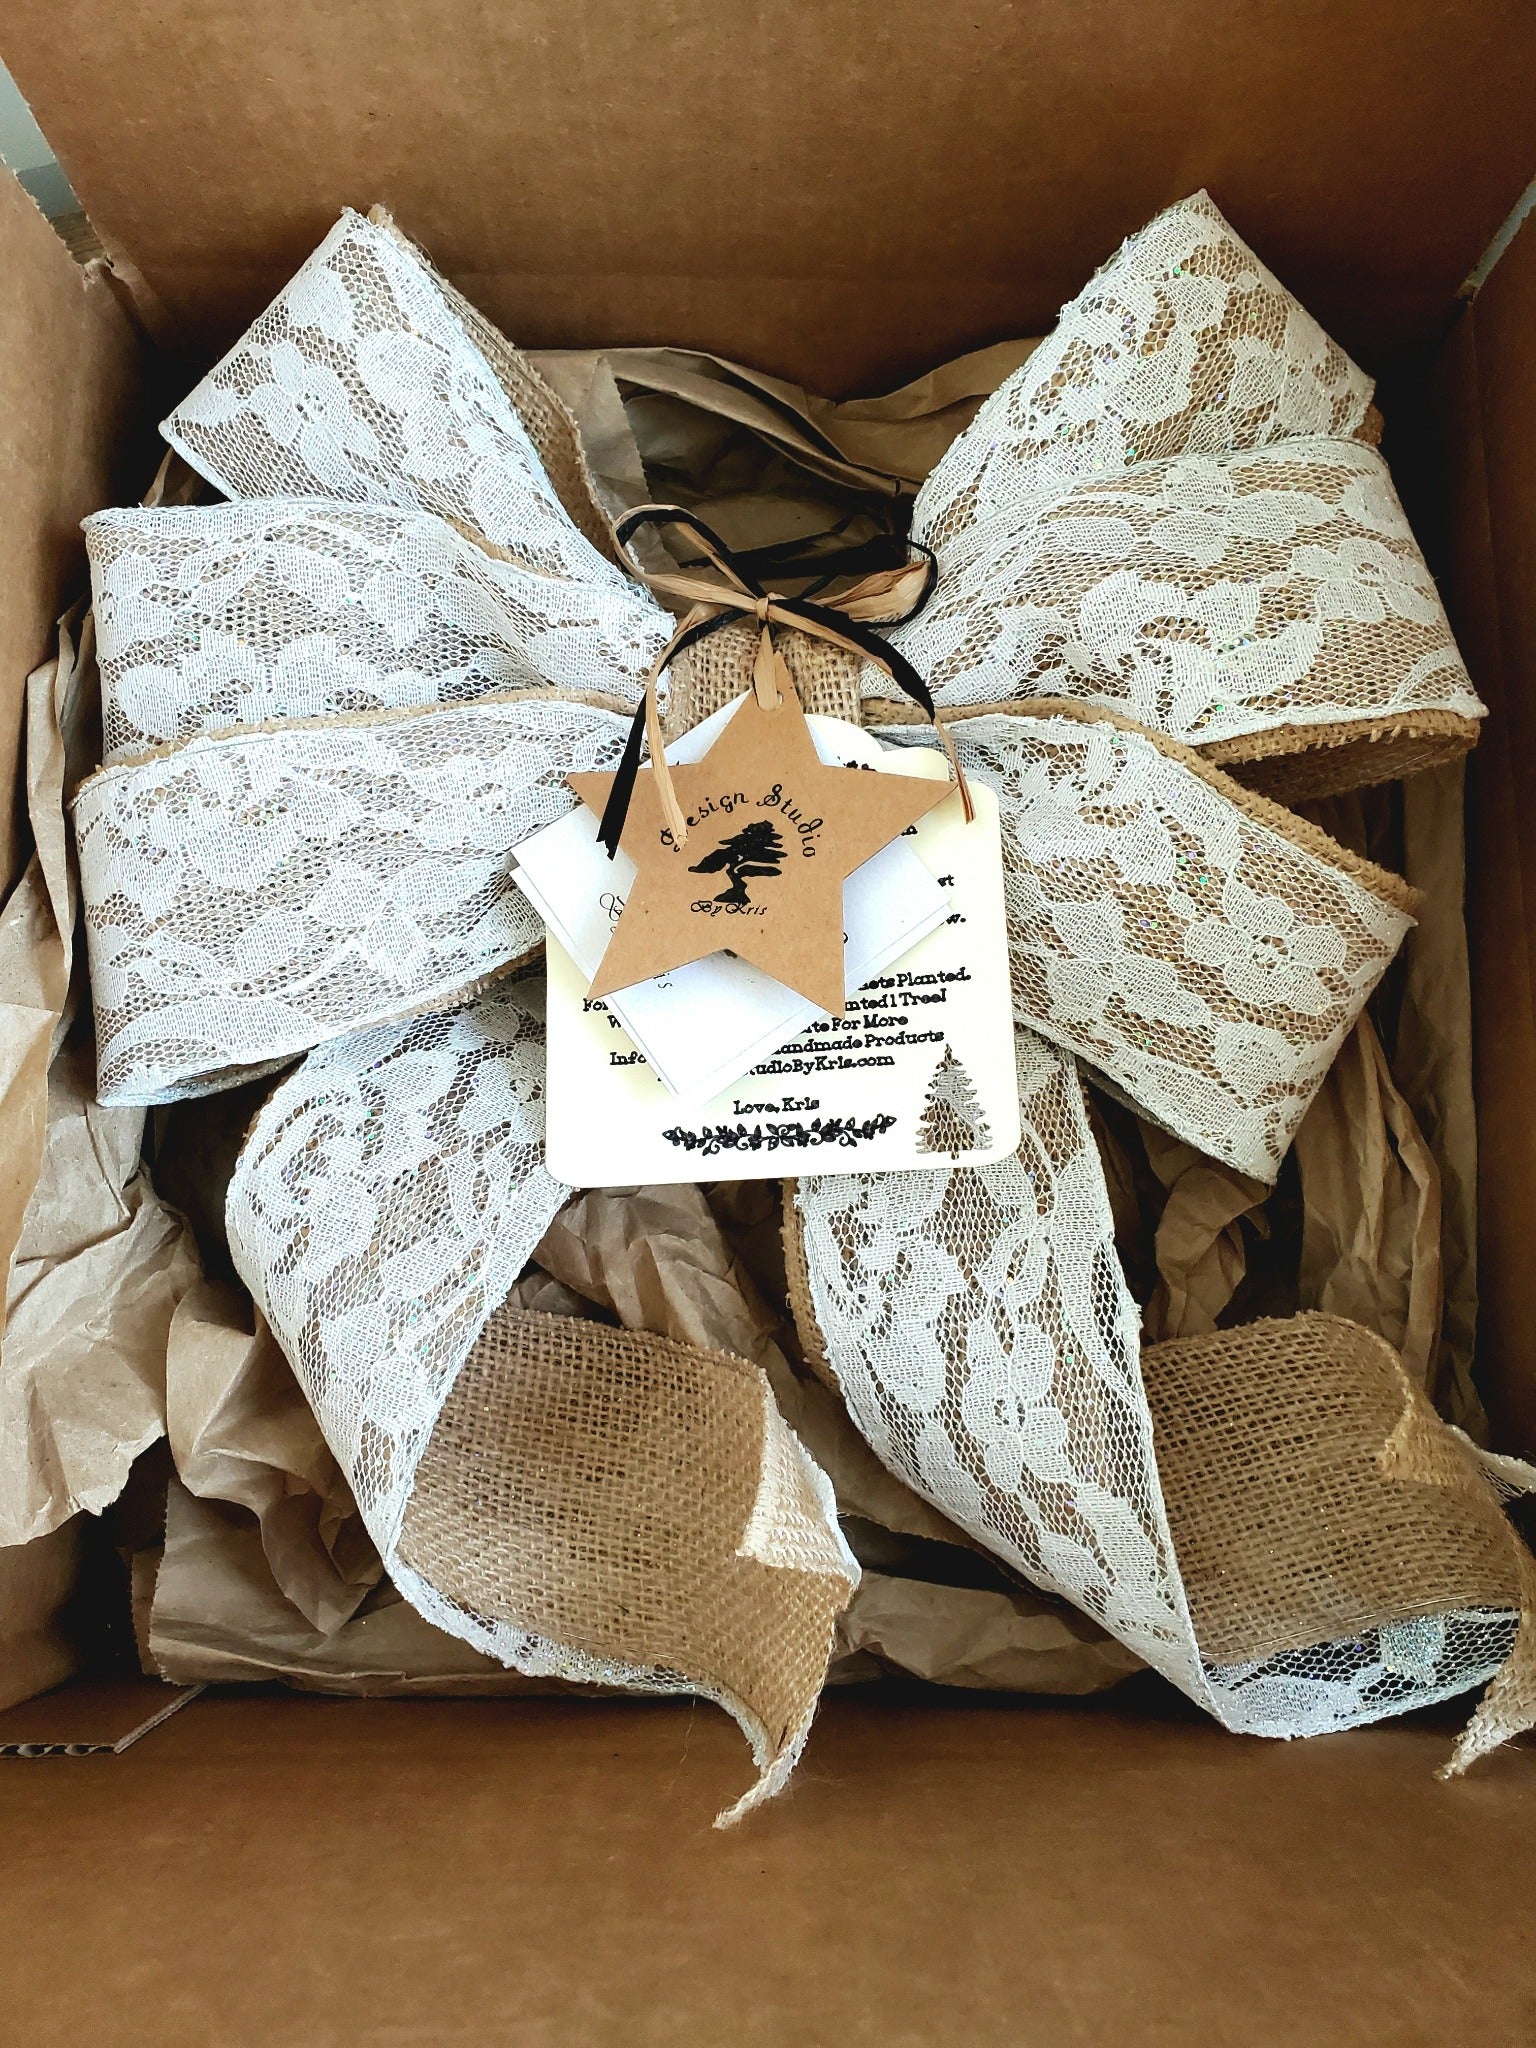 burlap and lace bow packaged and ready to be shipped